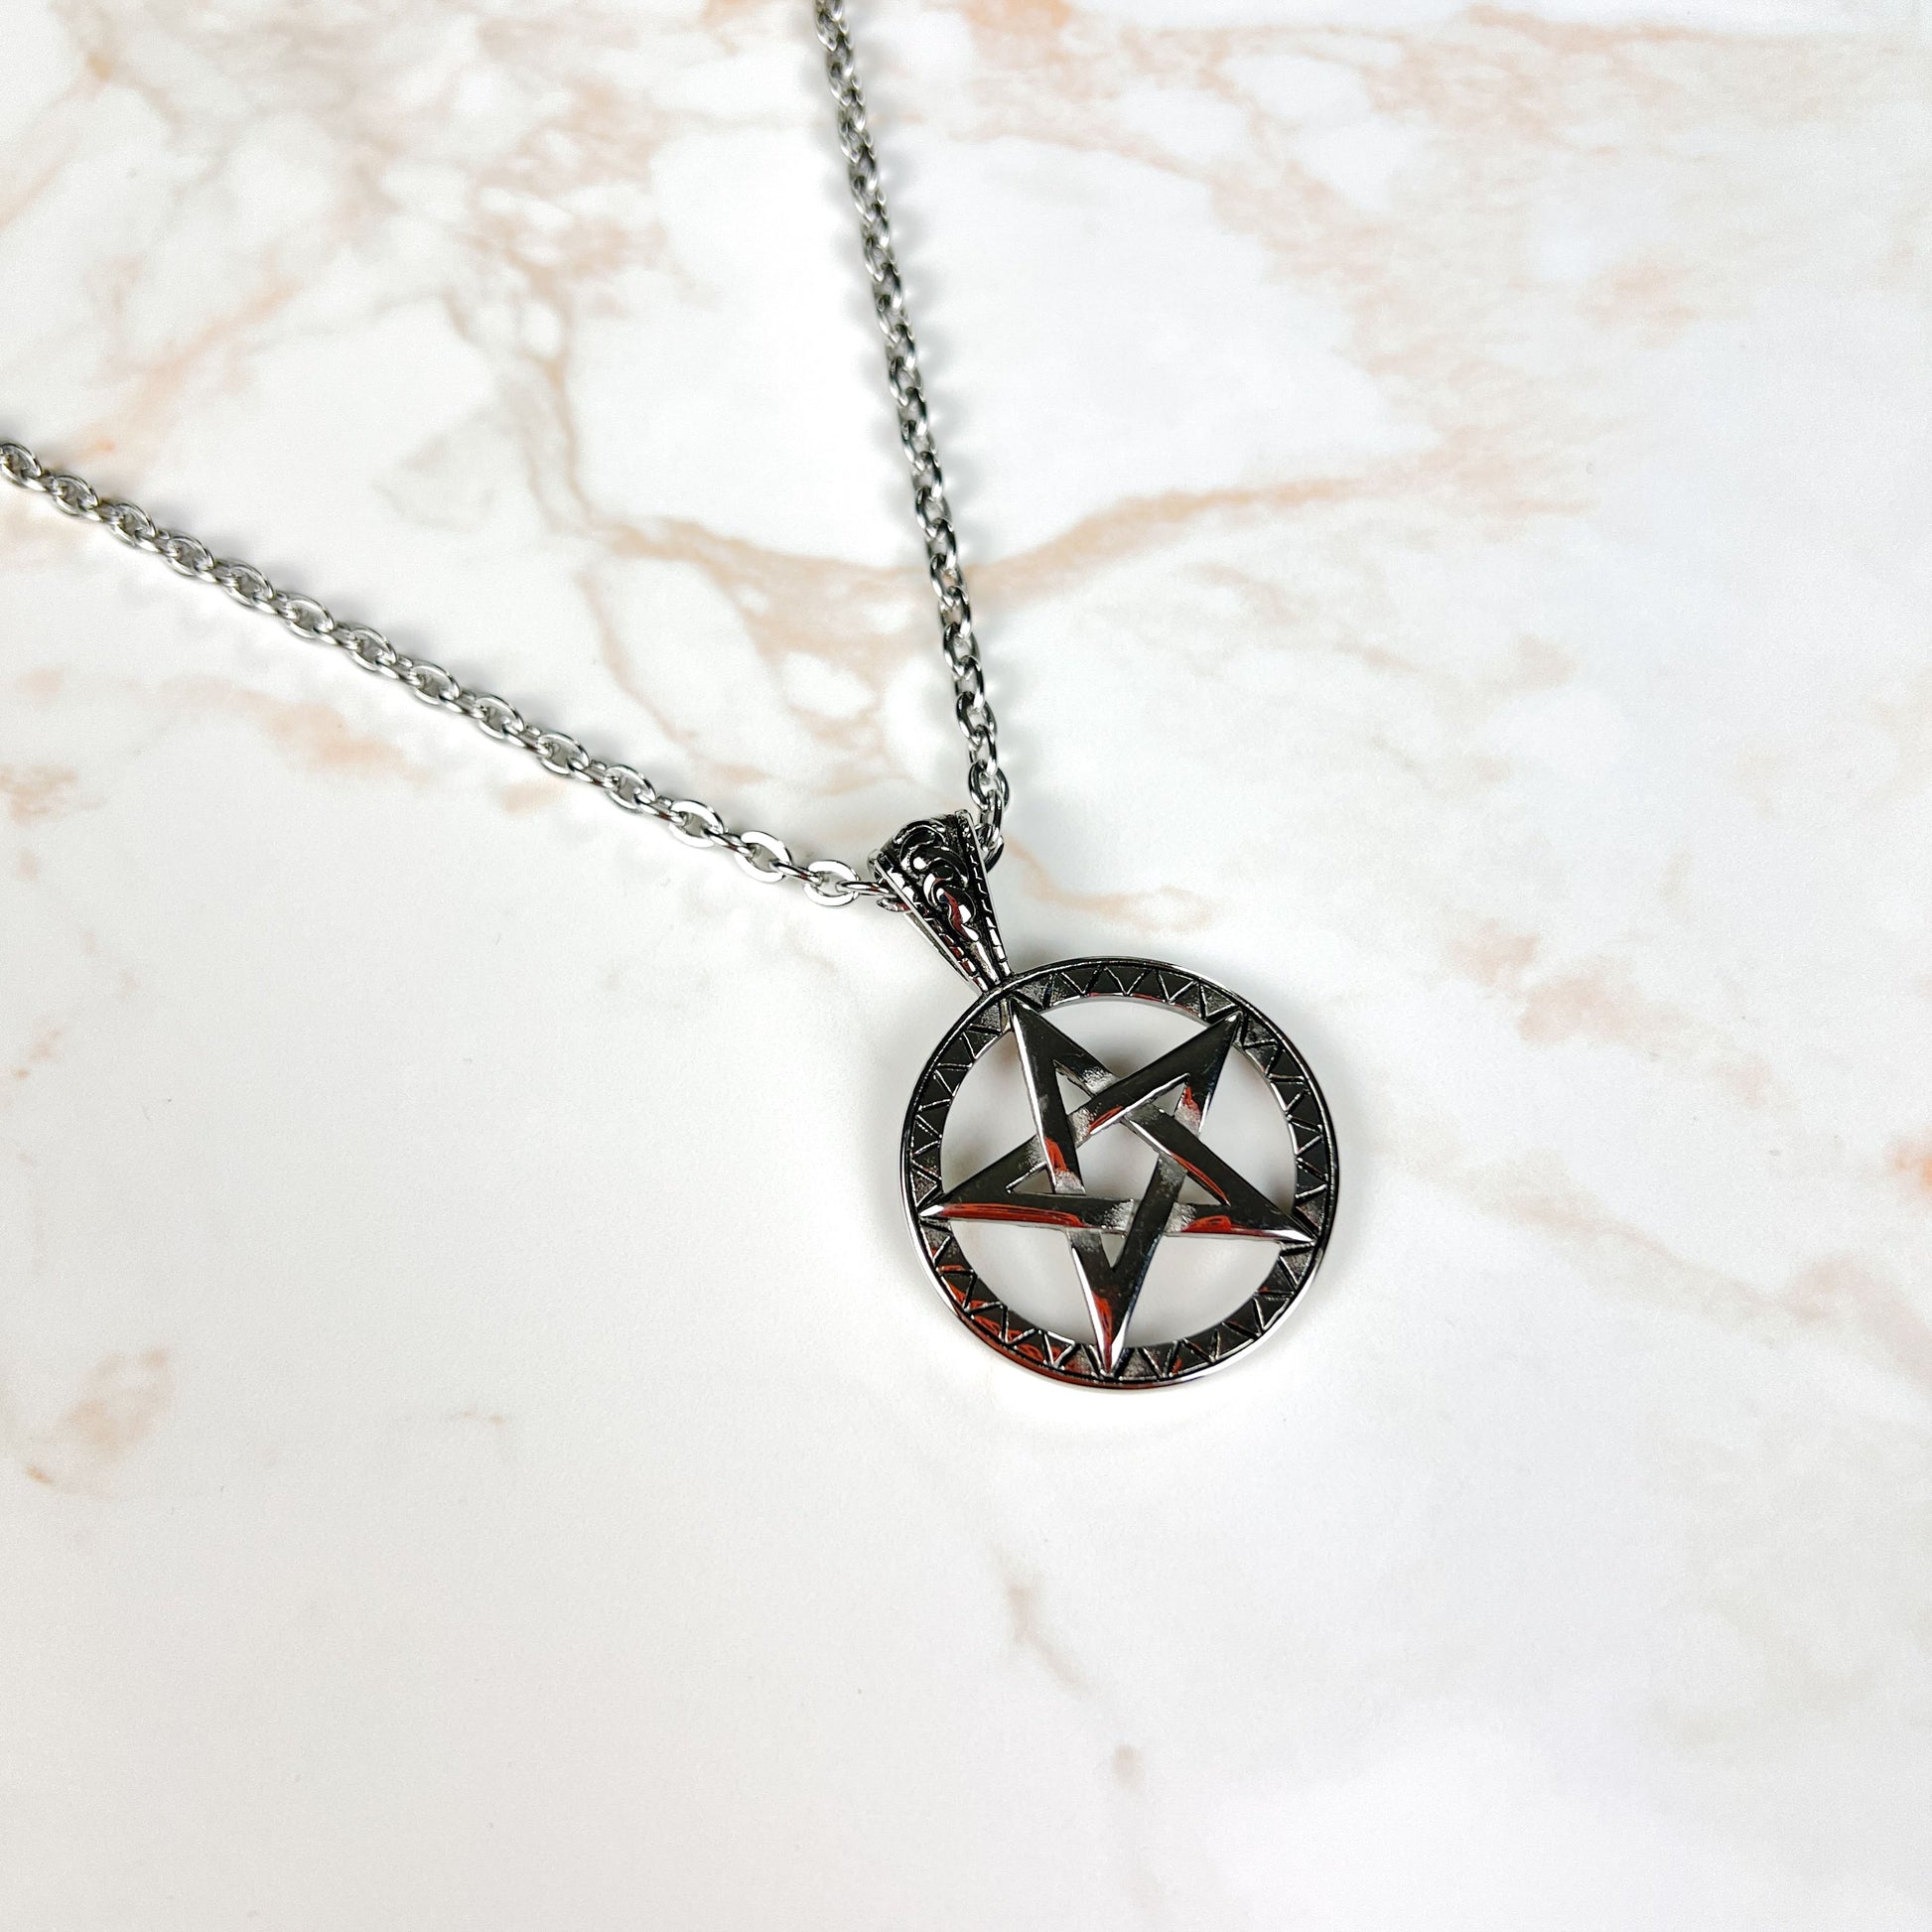 Stainless steel pentacle witch necklace Baguette Magick